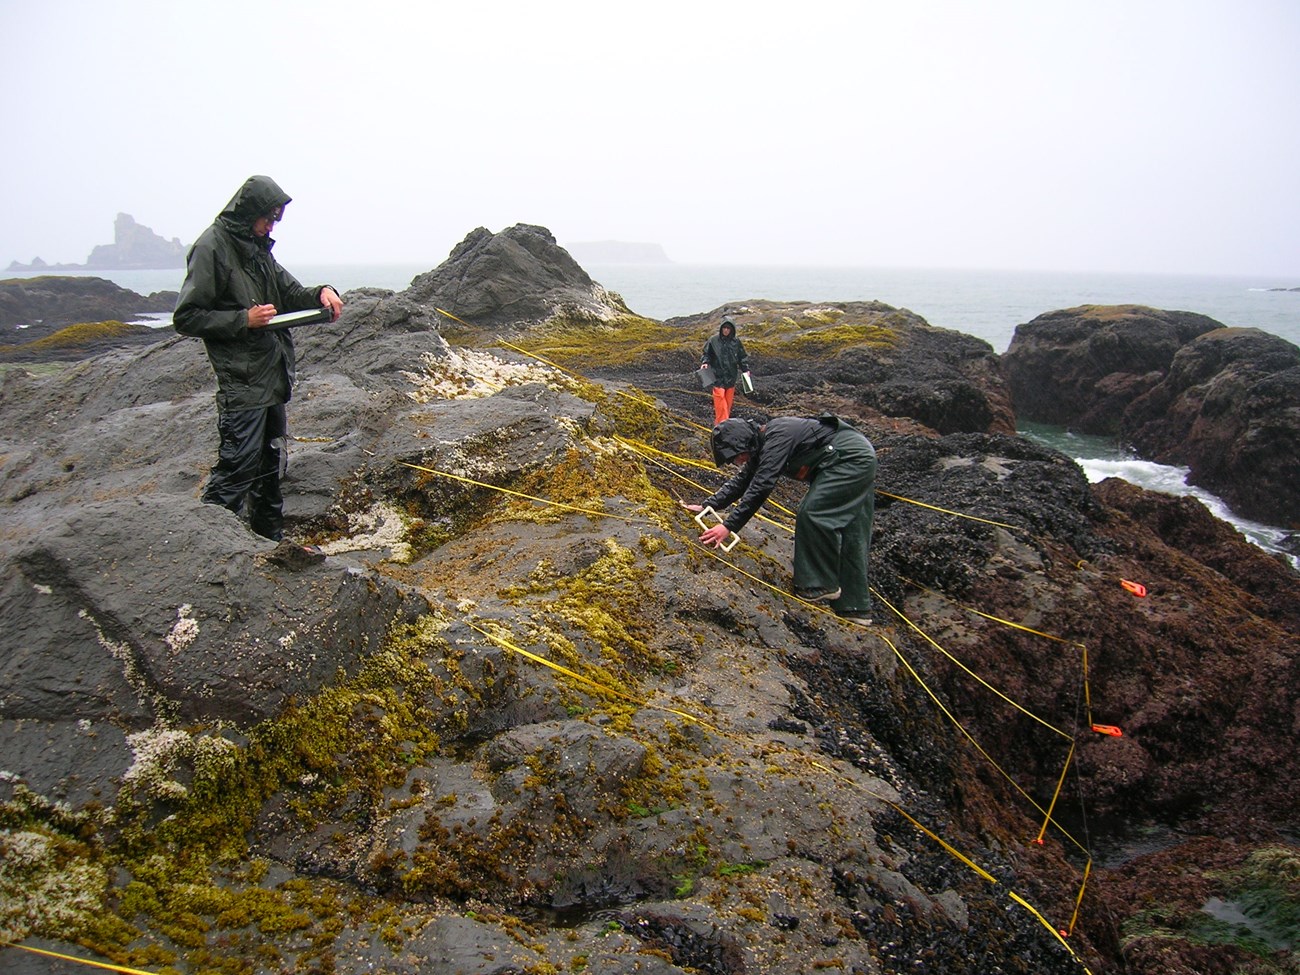 Three people in full rain gear collect data from a rocky intertidal plot marked by a series of measuring tapes laid out in a grid over different bands of mussels and algae clinging to the exposed rocks.